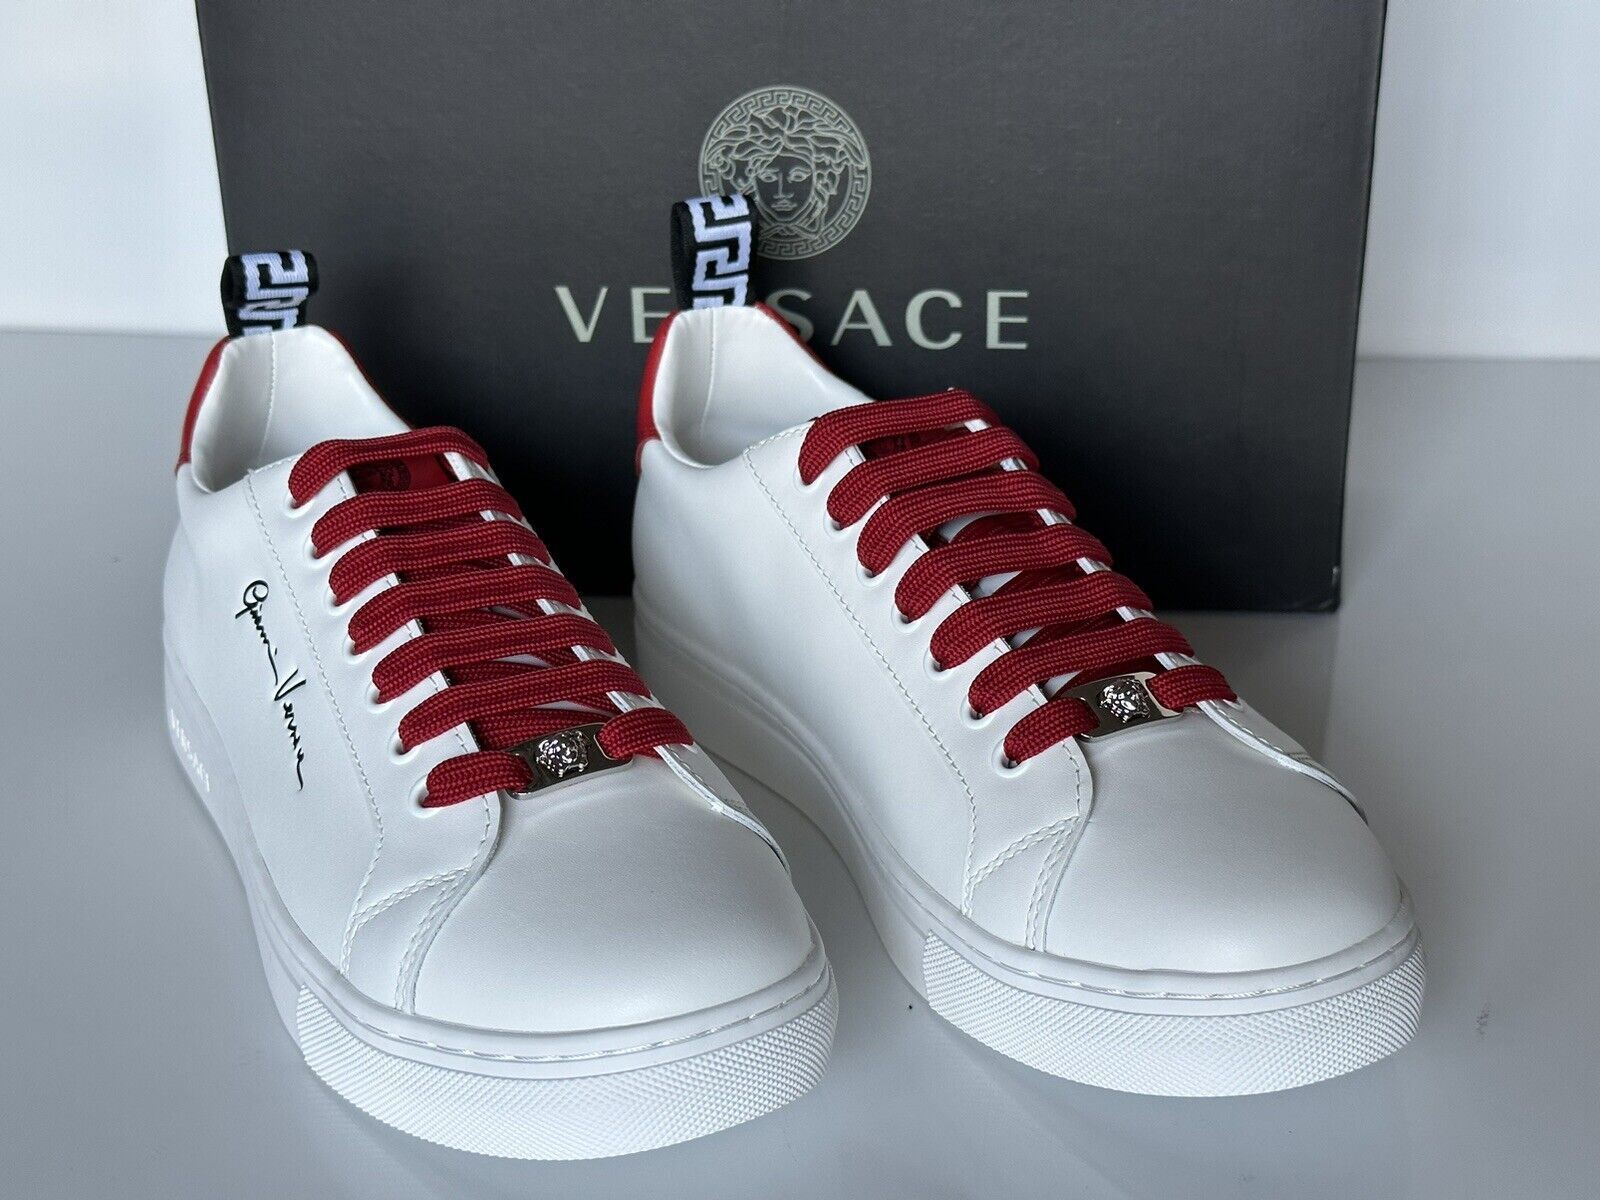 NIB $750 Versace Low Top White/Red Leather Sneakers 8 US (38 Euro) 1002773